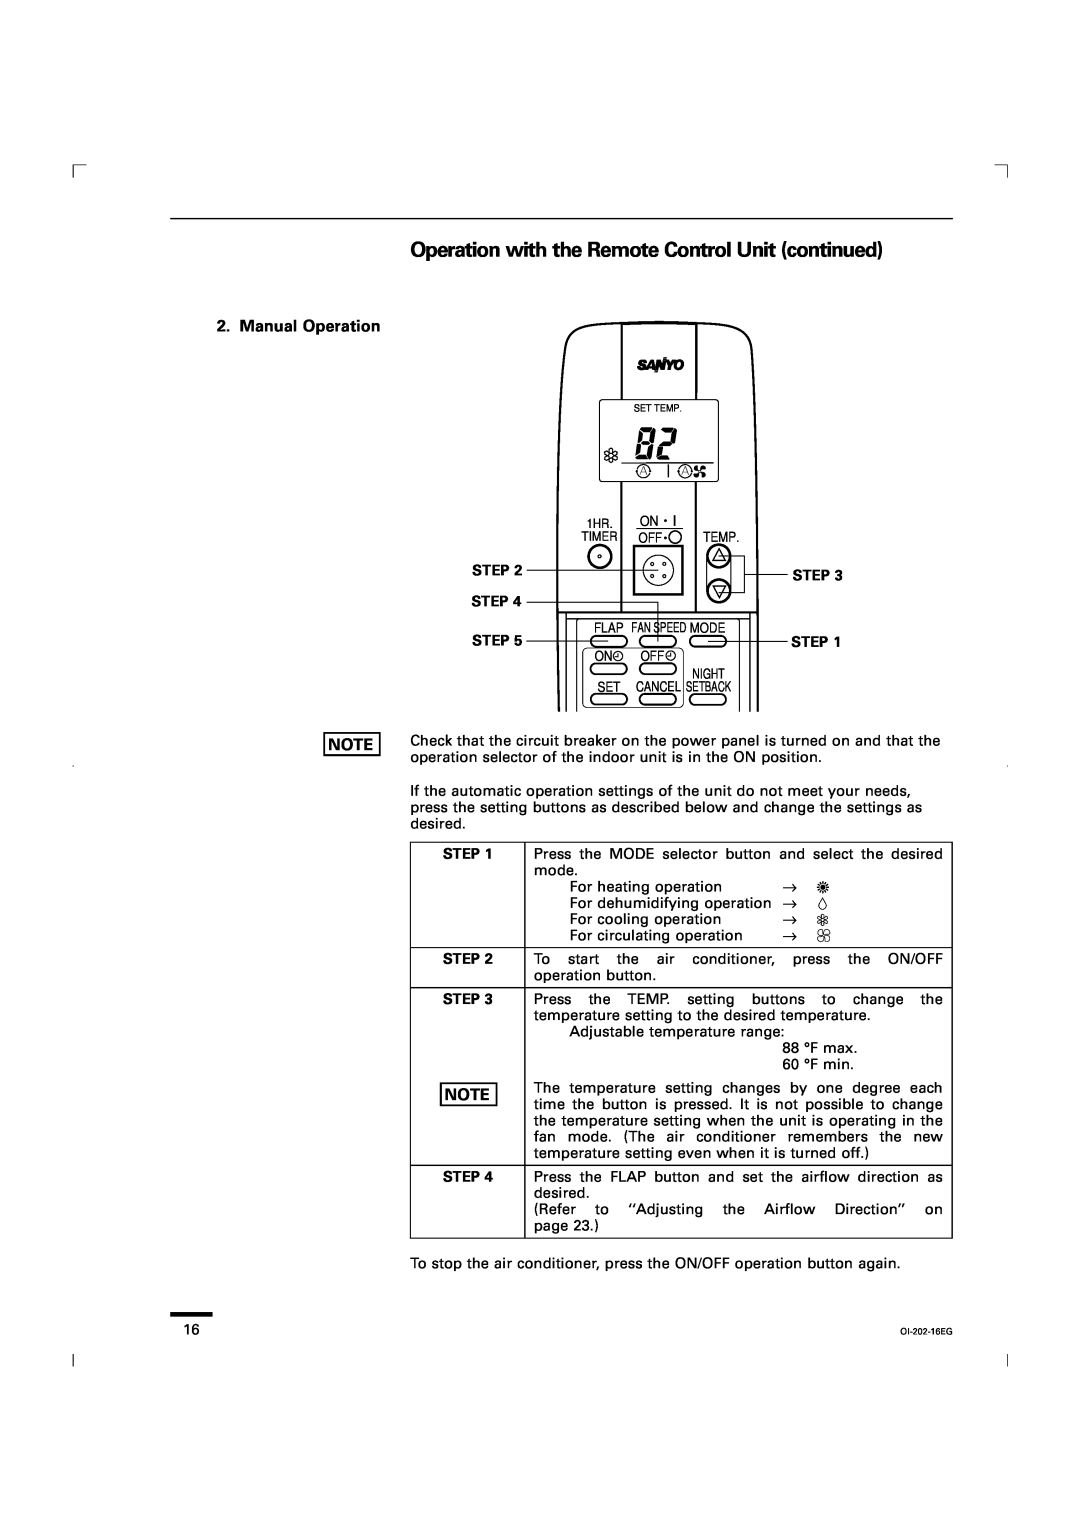 Sanyo CG1411, KGS1411 service manual Operation with the Remote Control Unit continued, Manual Operation 